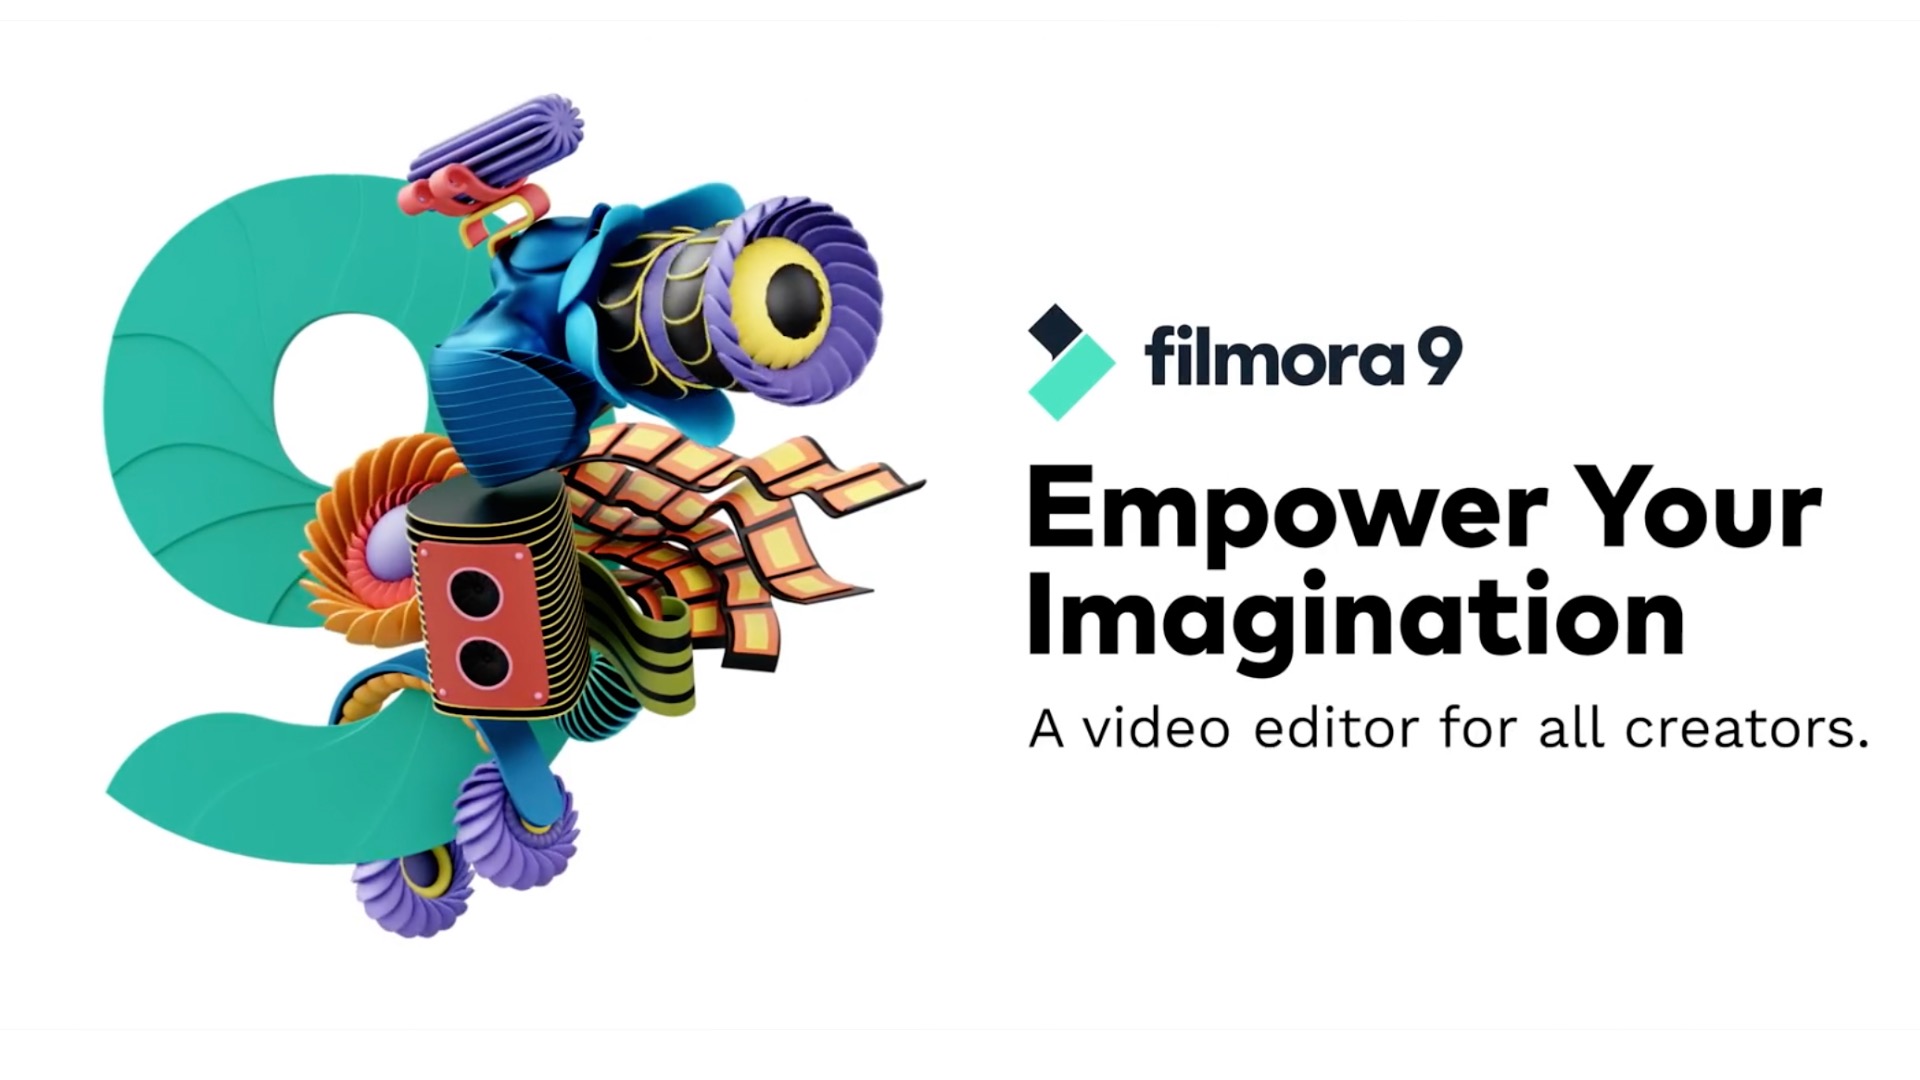 You Ask, We Answer- Answers to Questions Related to Filmora